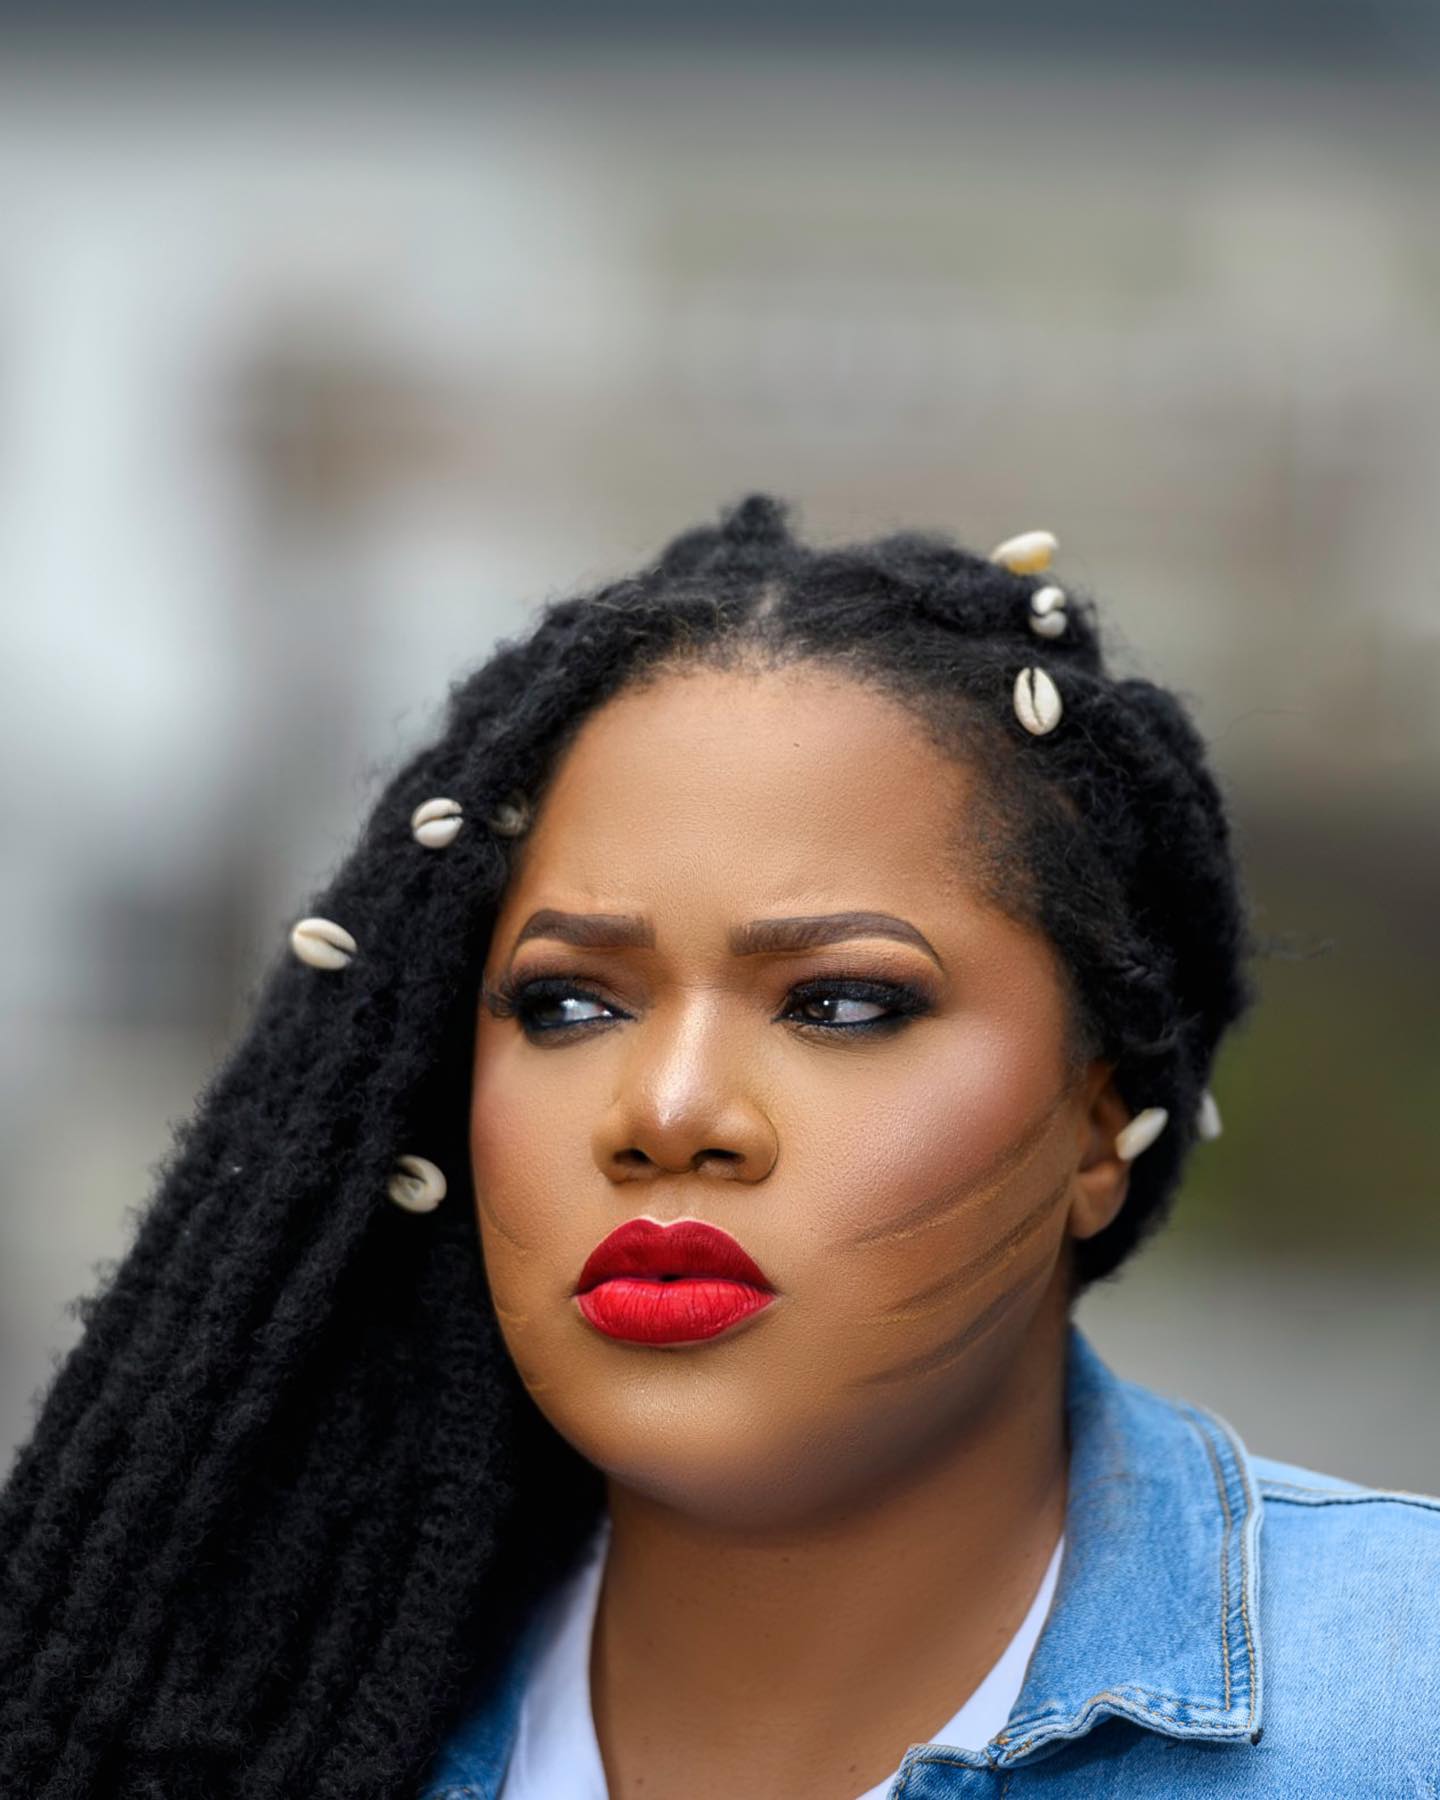 Toyin Abraham unveils first photos of forthcoming thriller ‘Ijakumo’